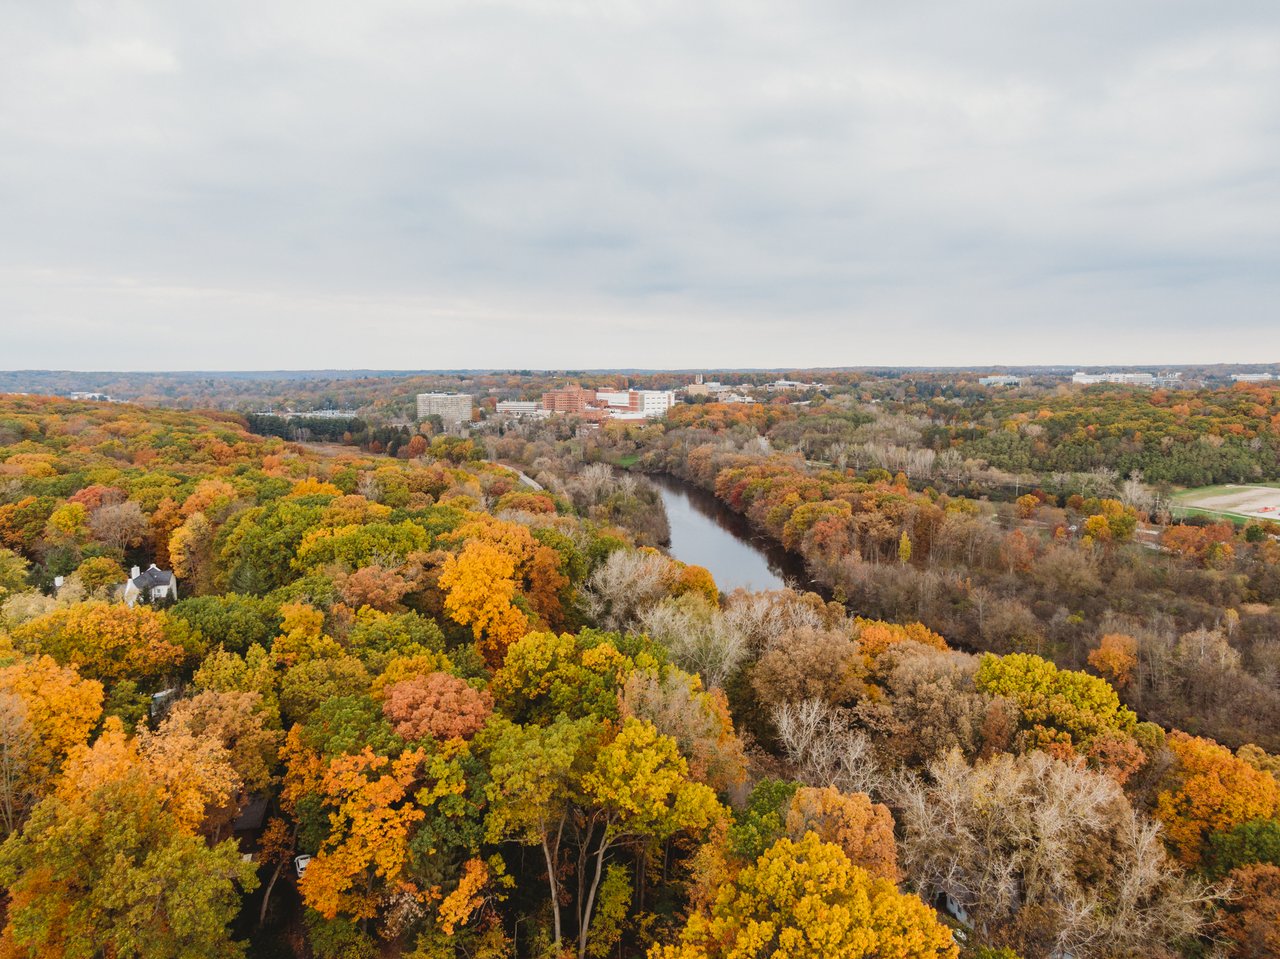 Trees show fall color in Michigan